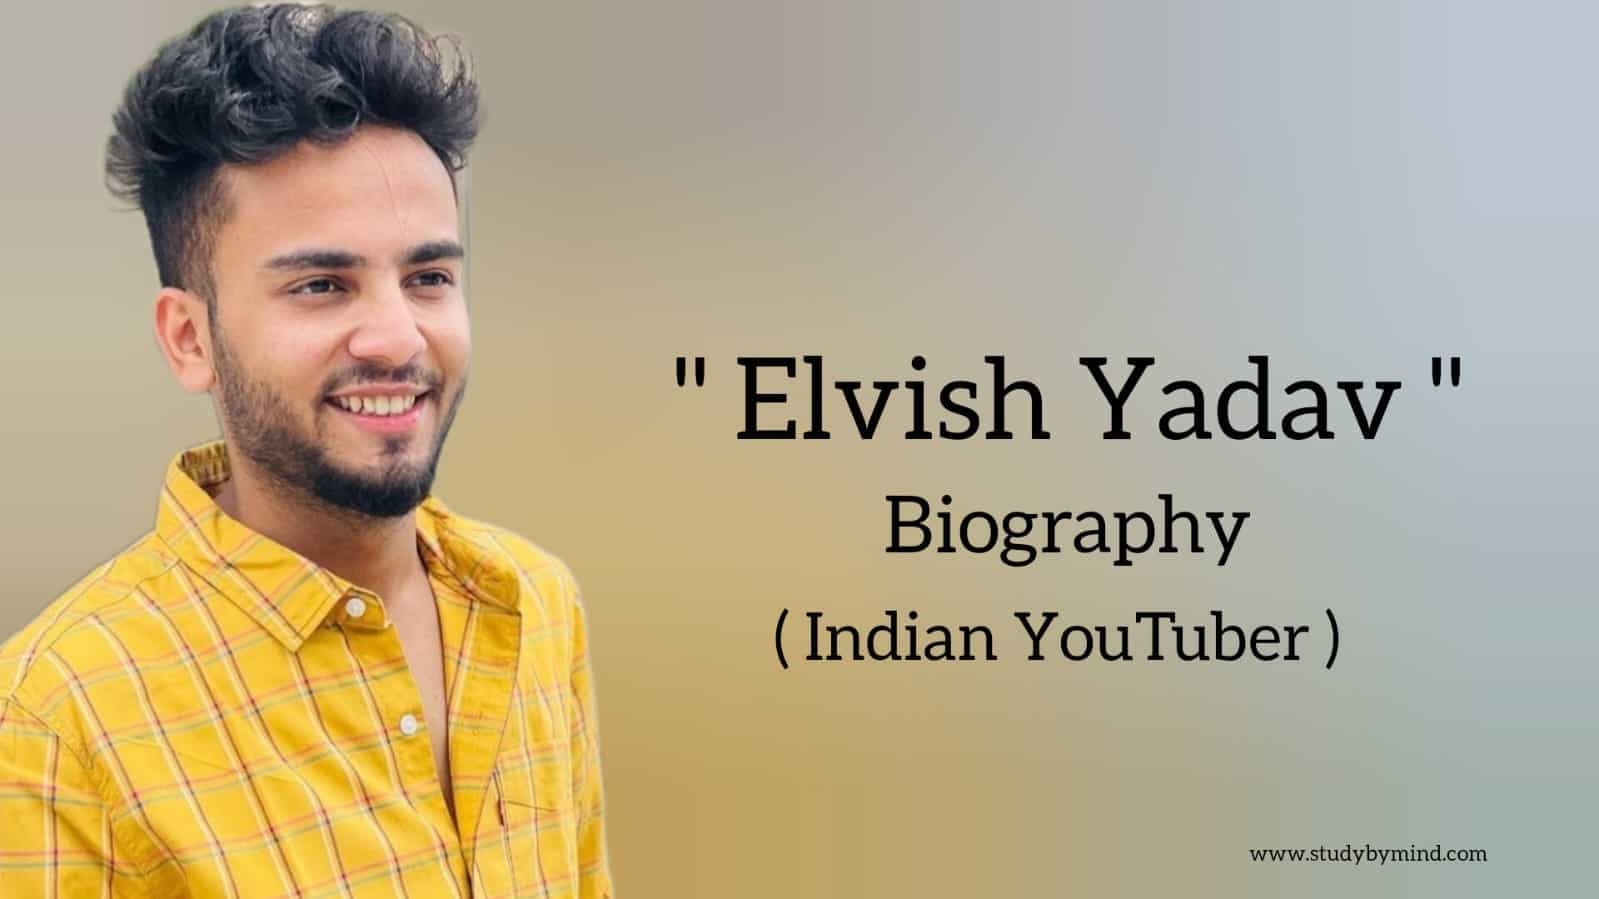 Elvish yadav biography in english (famous youtuber) - Study By Mind